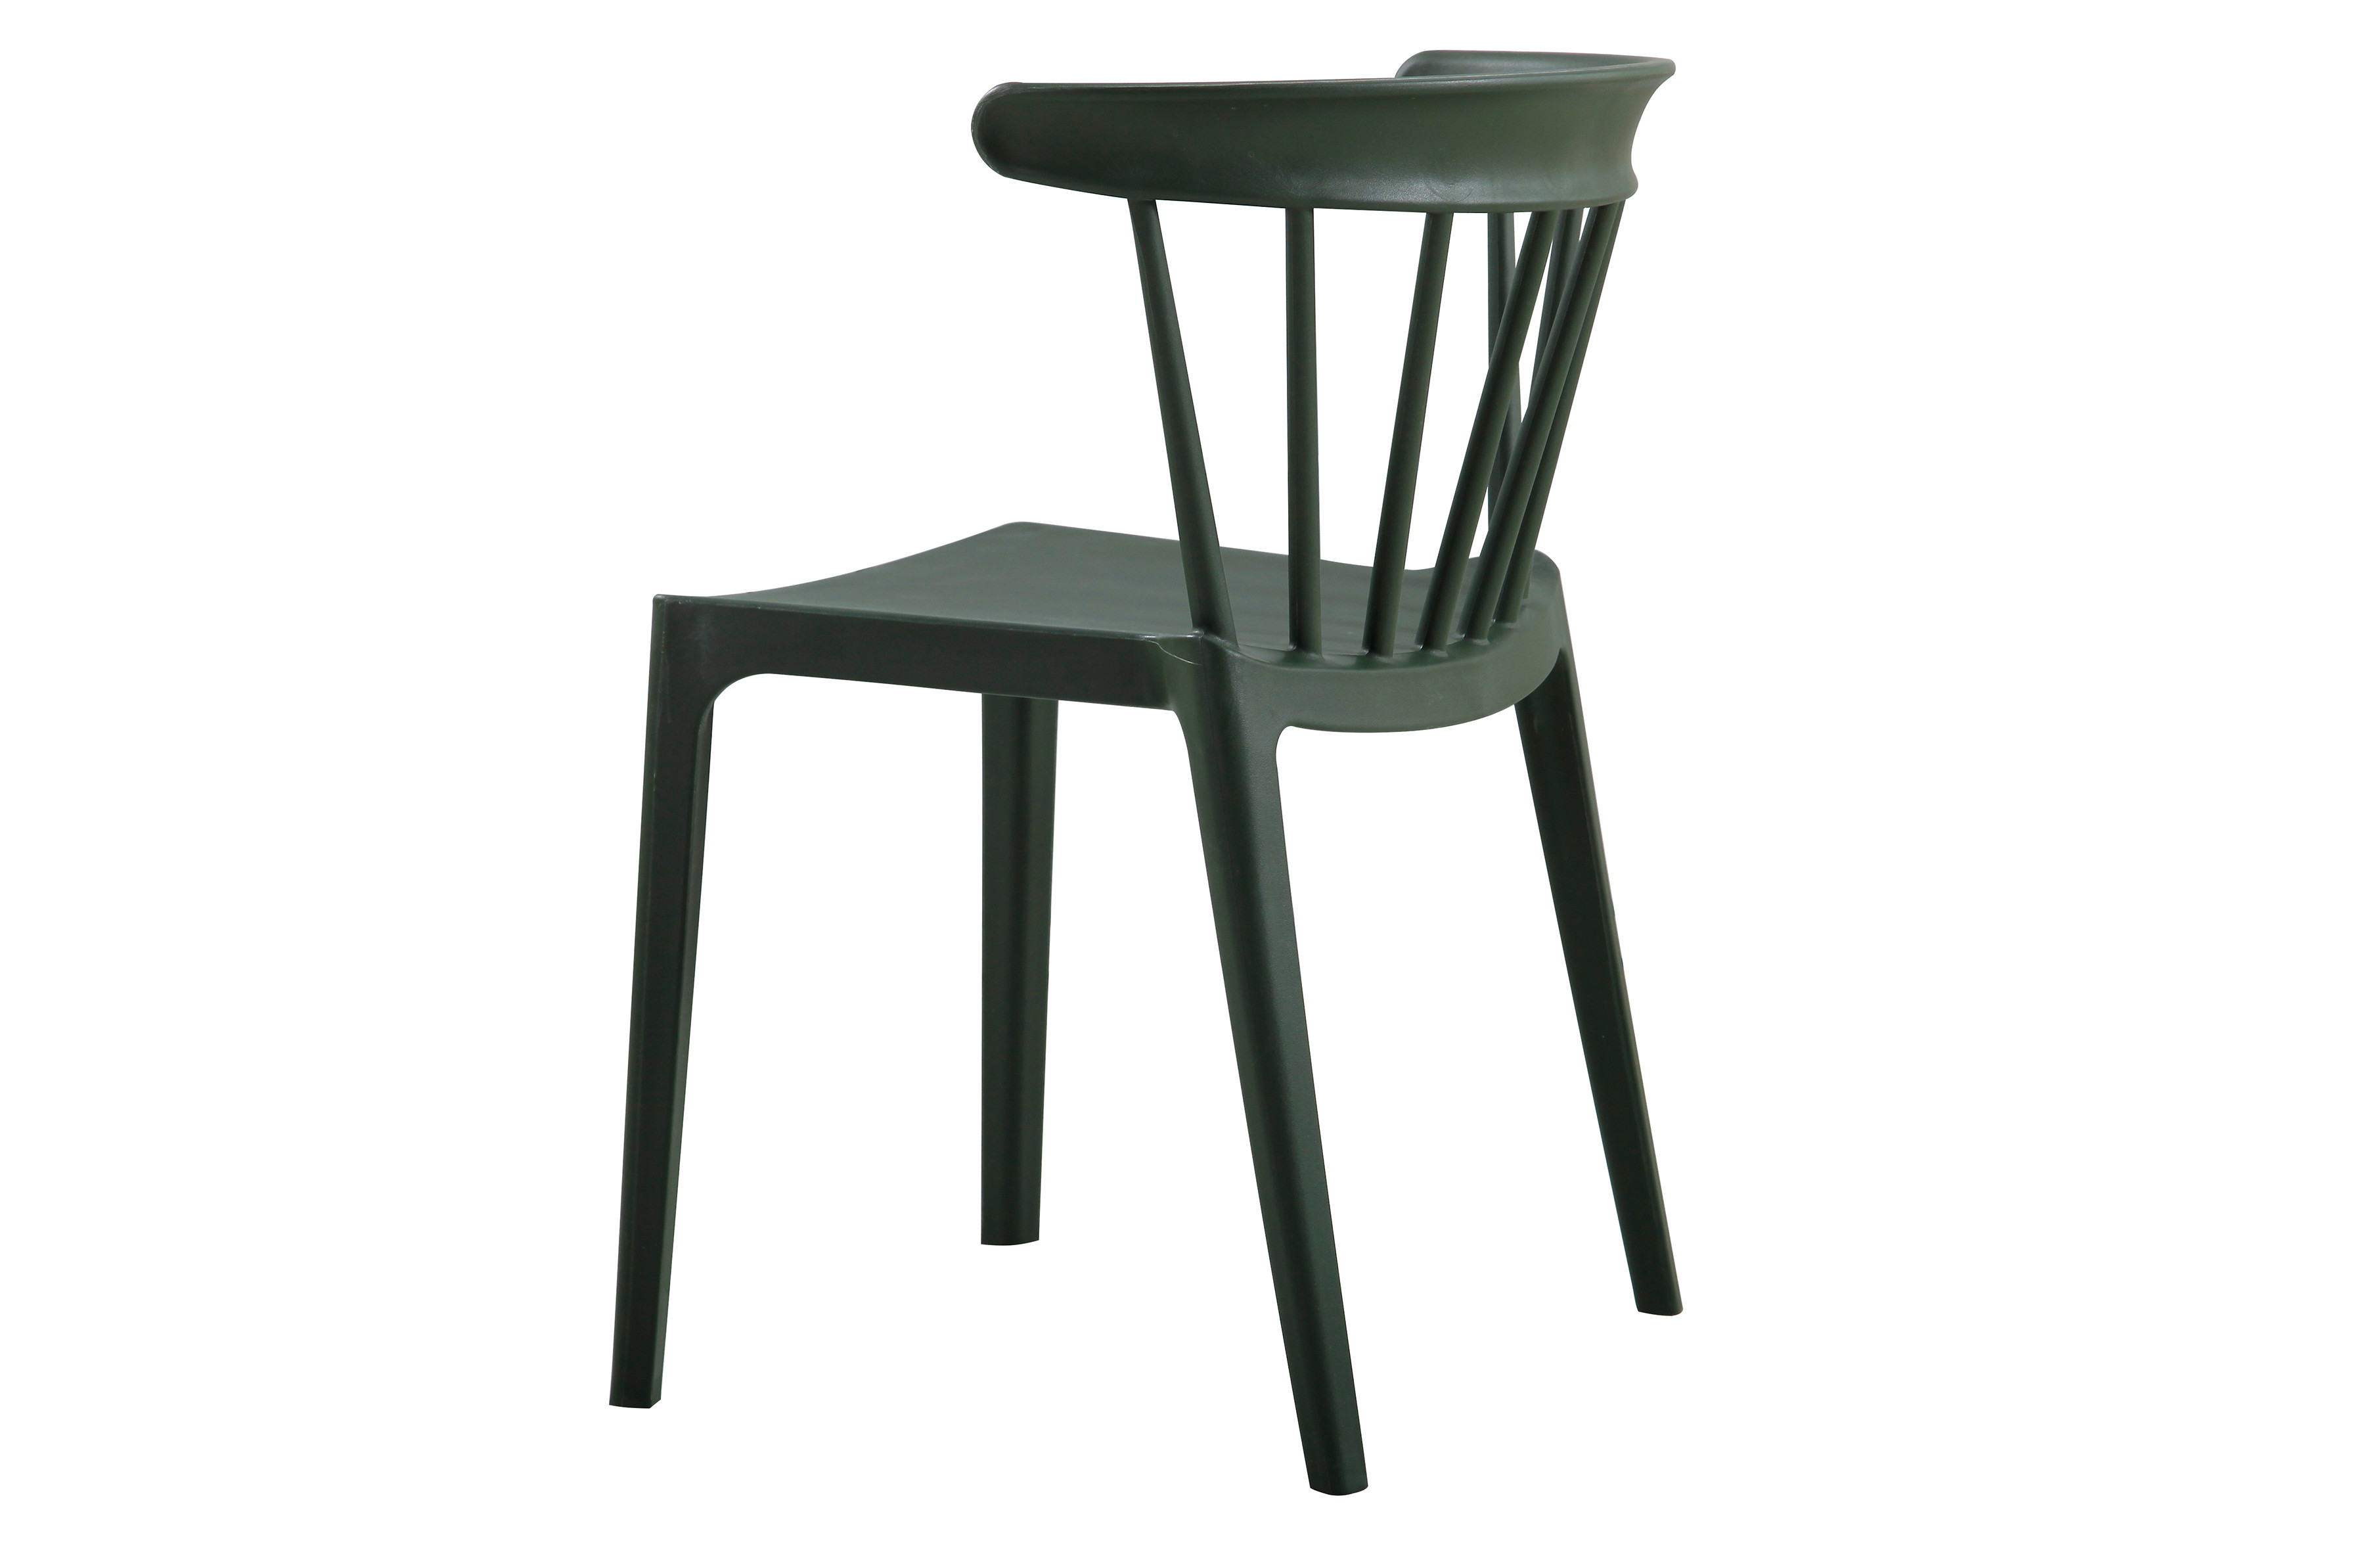 Rent a Straight chair Bliss plastic green? Rent at KeyPro furniture rental!